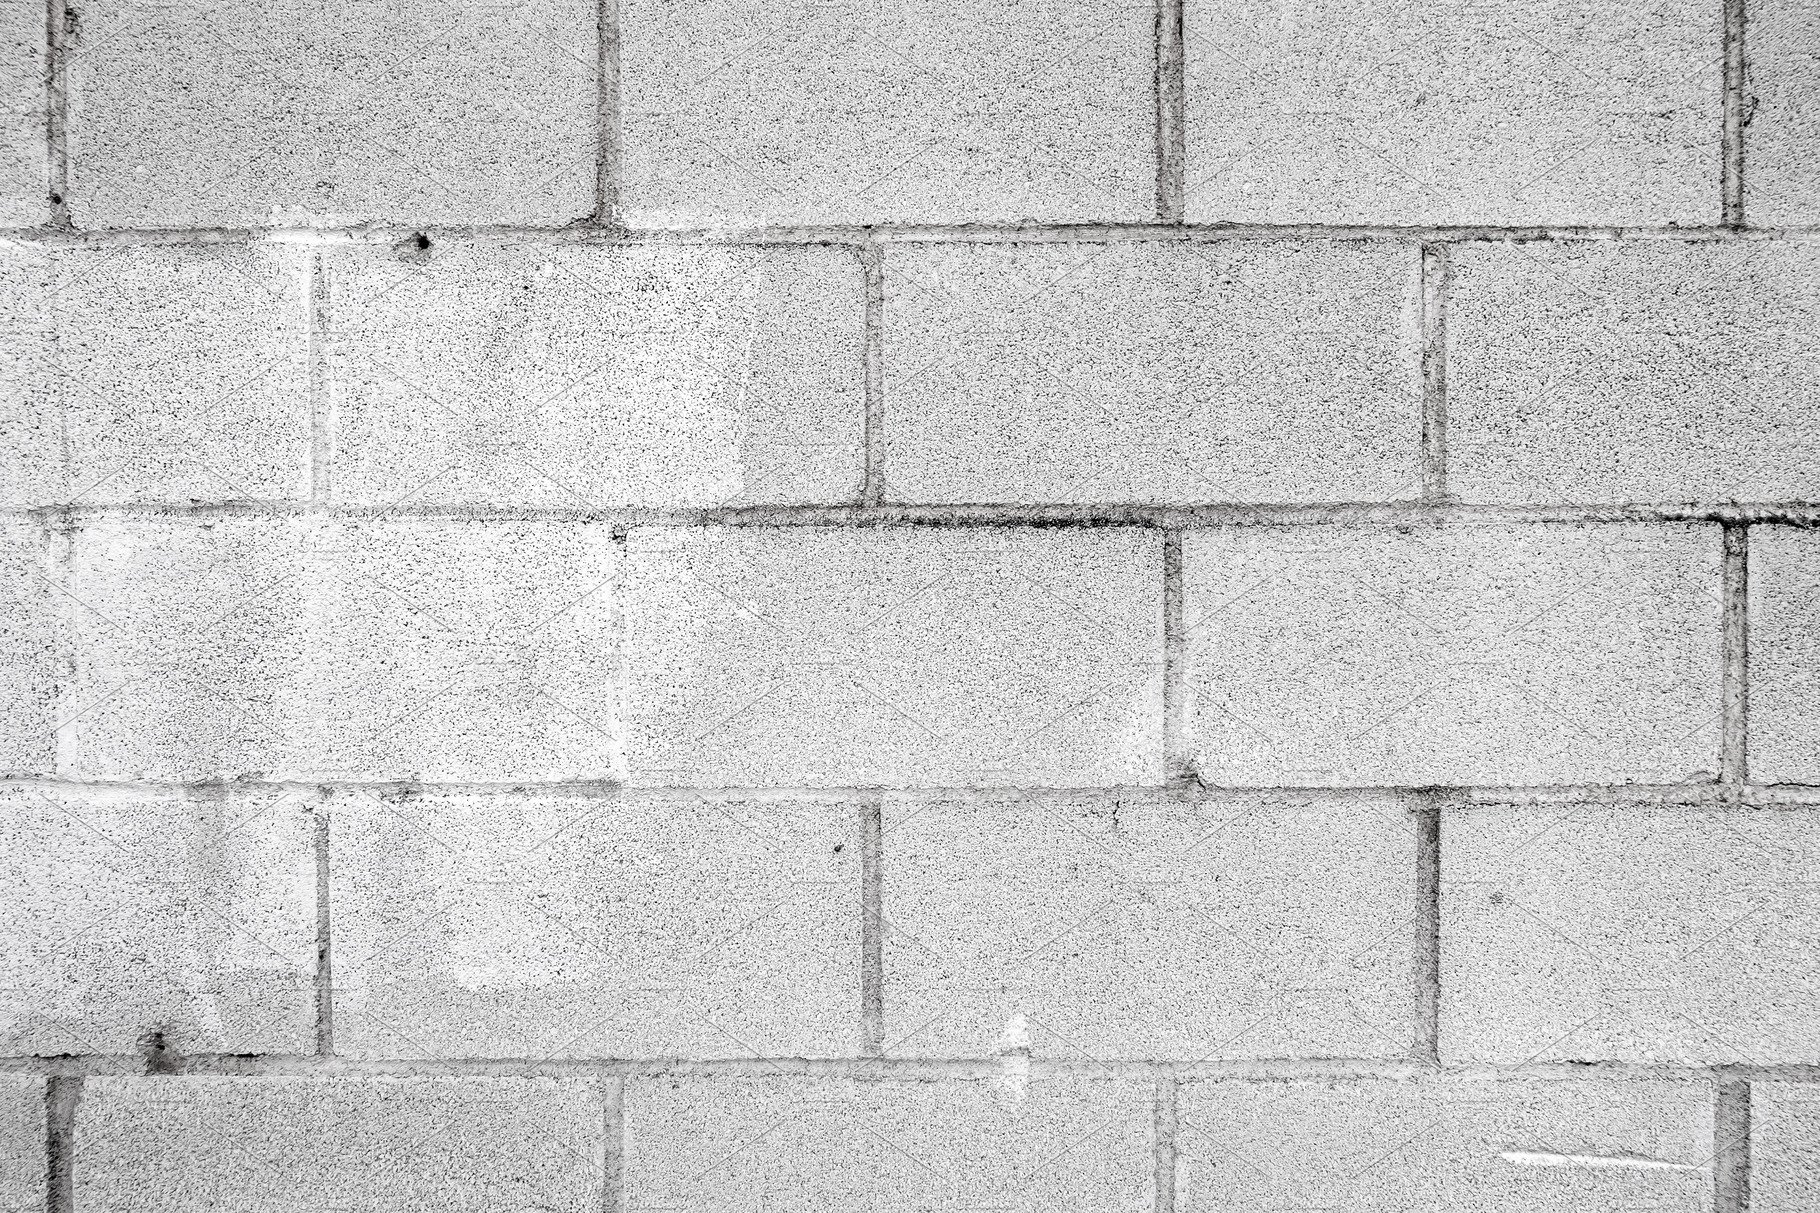 Cinder block wall background texture cover image.